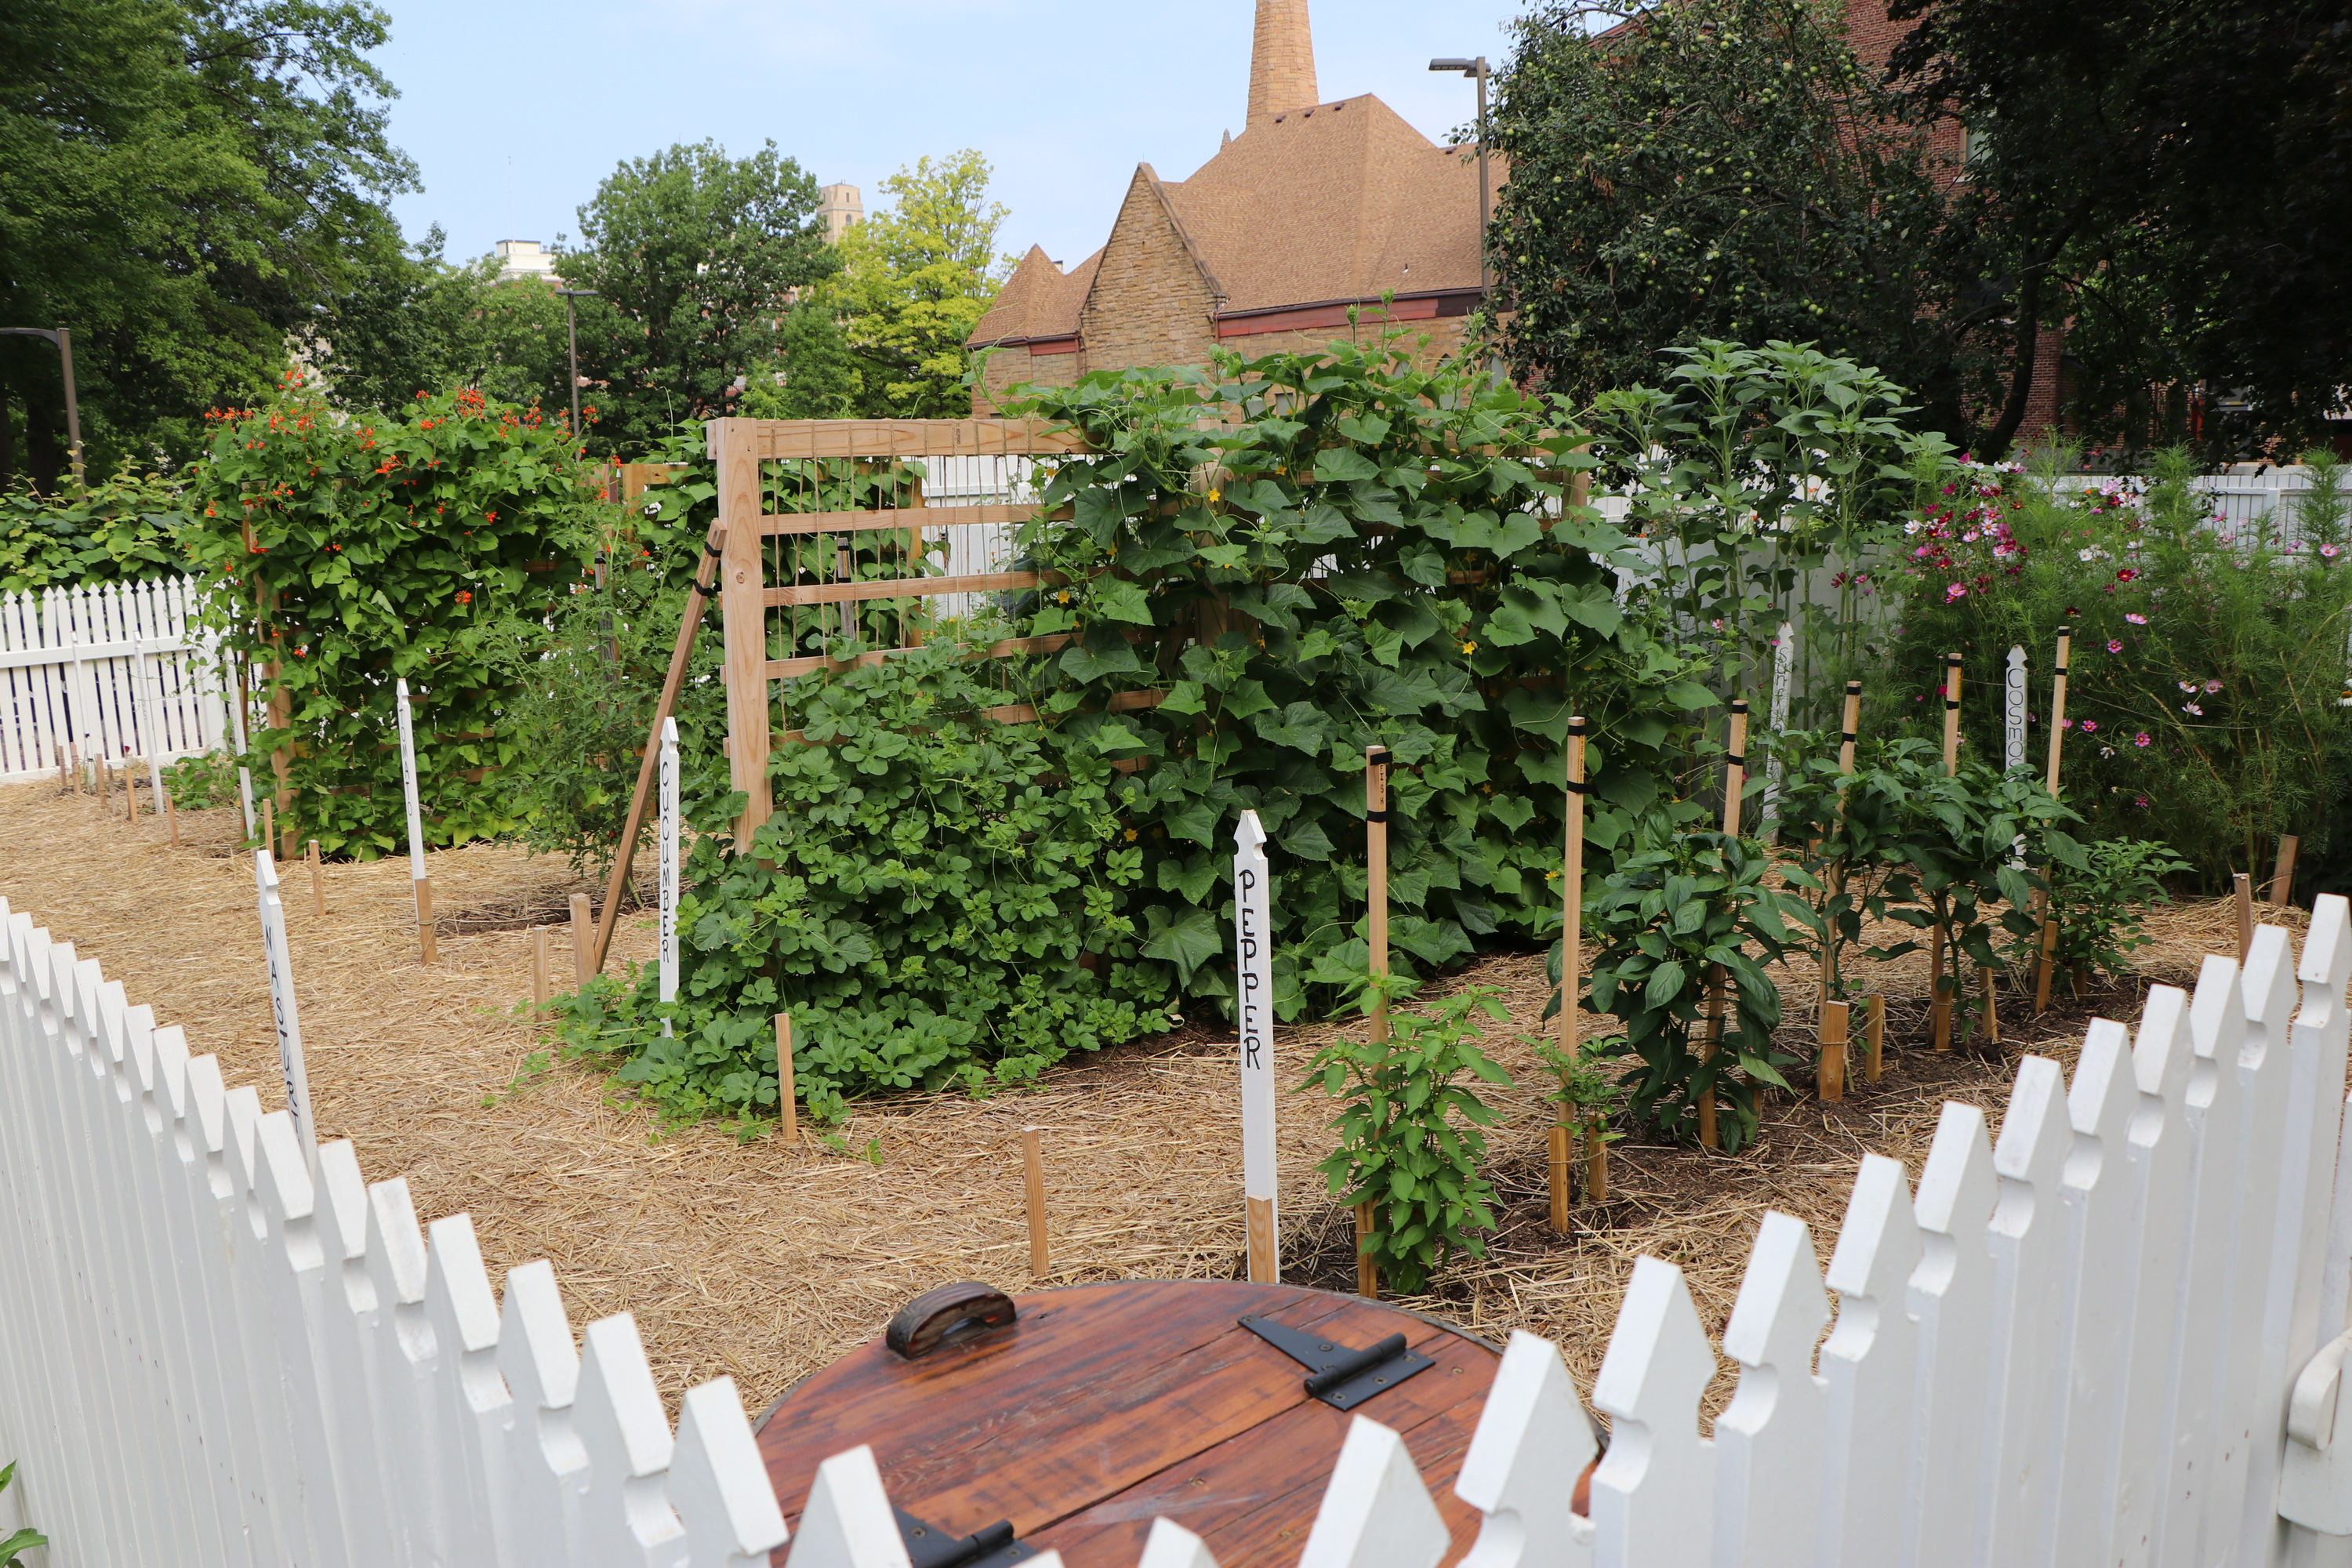 A garden with a variety of flowers, fruits, vegetables, and herbs surrounded by a white picket fence.